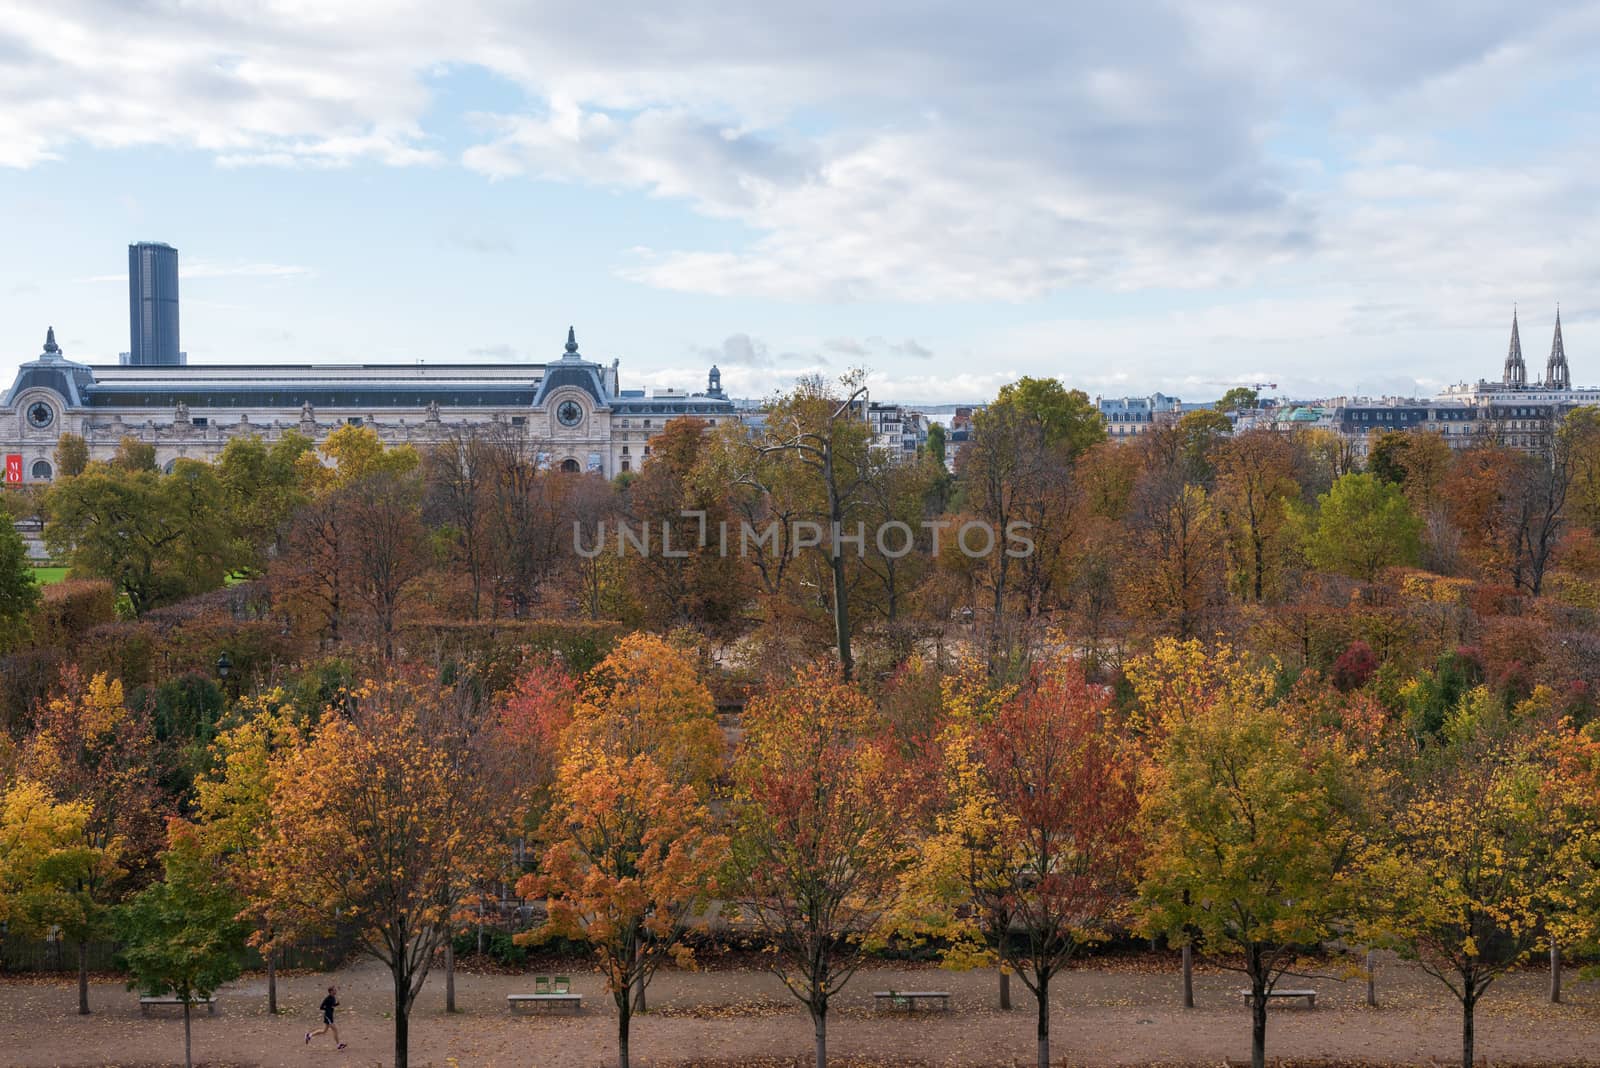 Paris, France -- November 5, 2017 -- Photo overlooking colorful trees in the Tuilerie Gardens;  a jogger is in the park,  Musee d'Orsay is in the background.